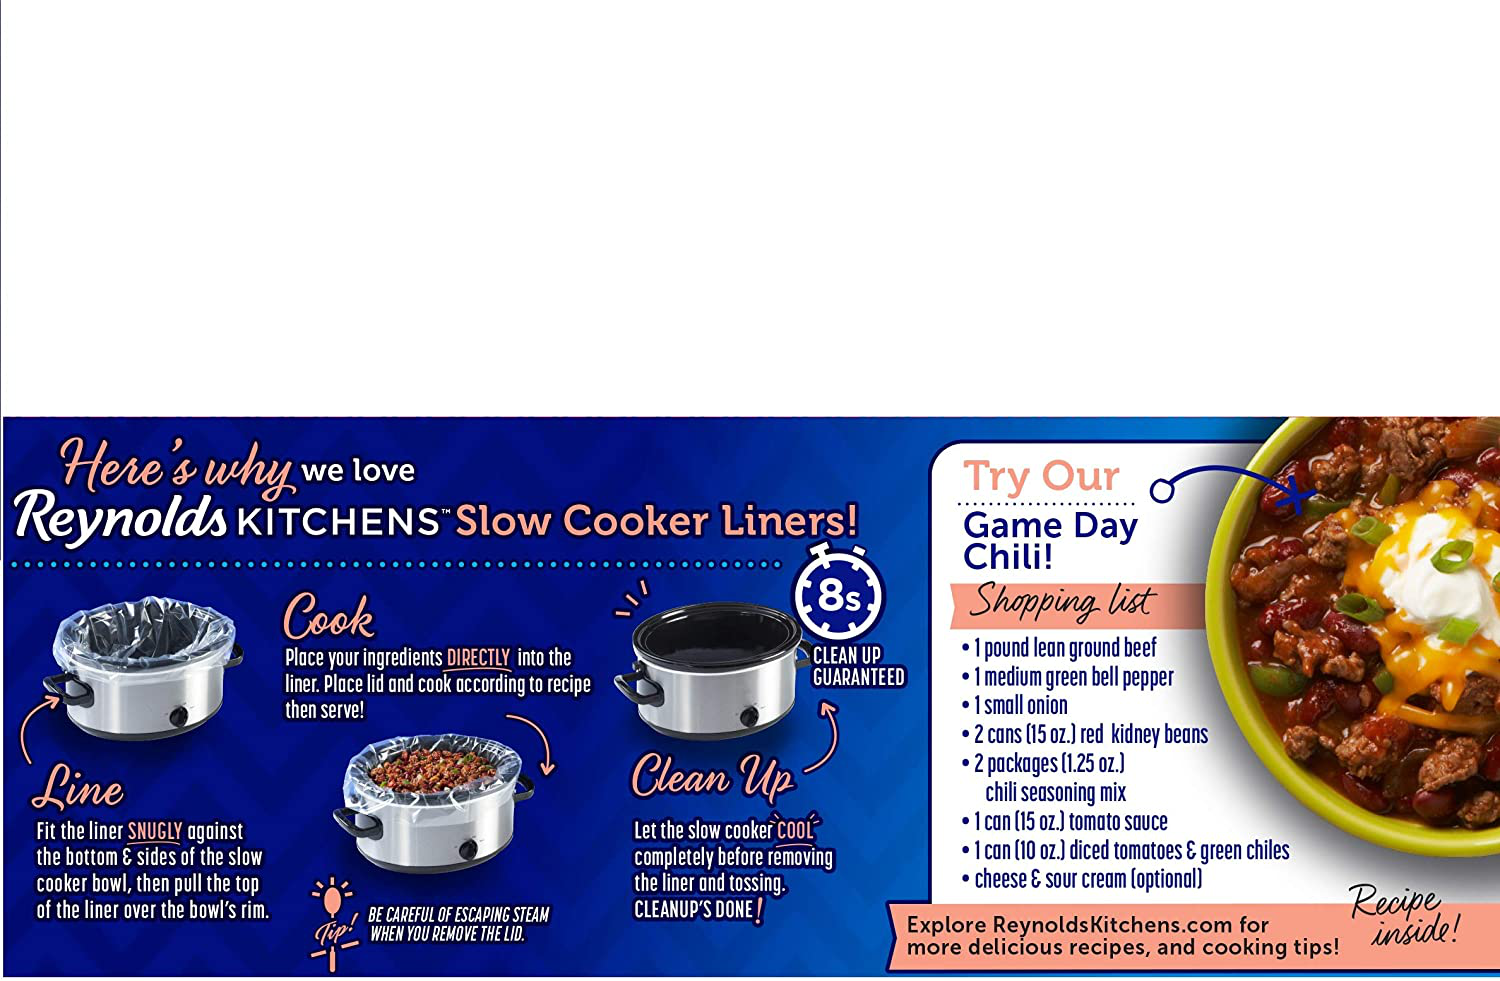 Reynolds Slow Cooker Liners 2 Pack (8 Liners total)